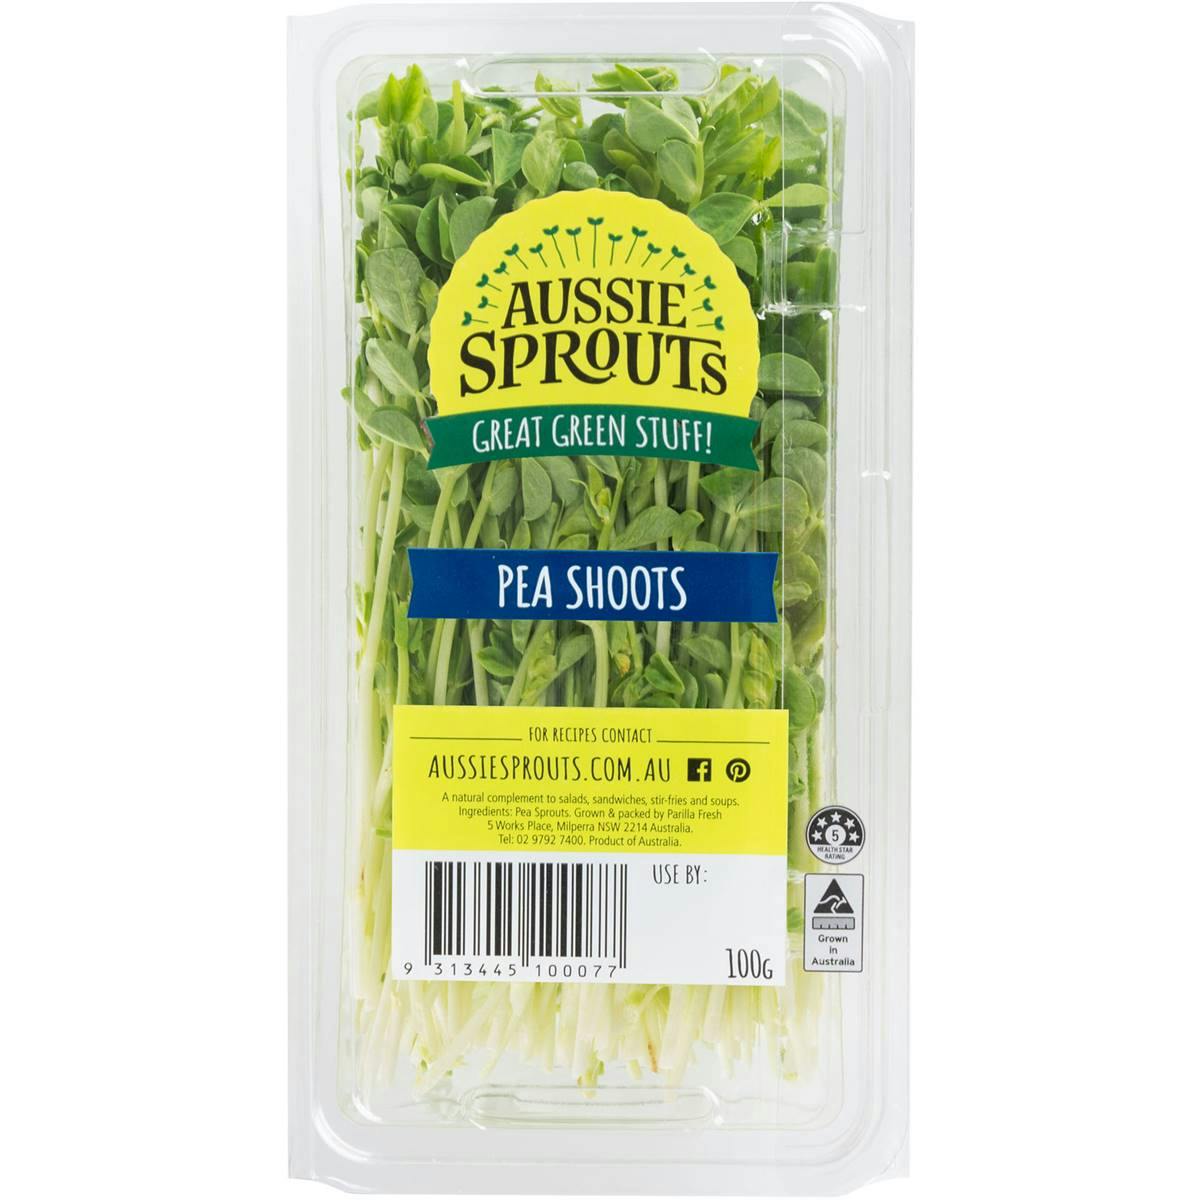 Aussie Sprouts Pea Shoots 100g Pack